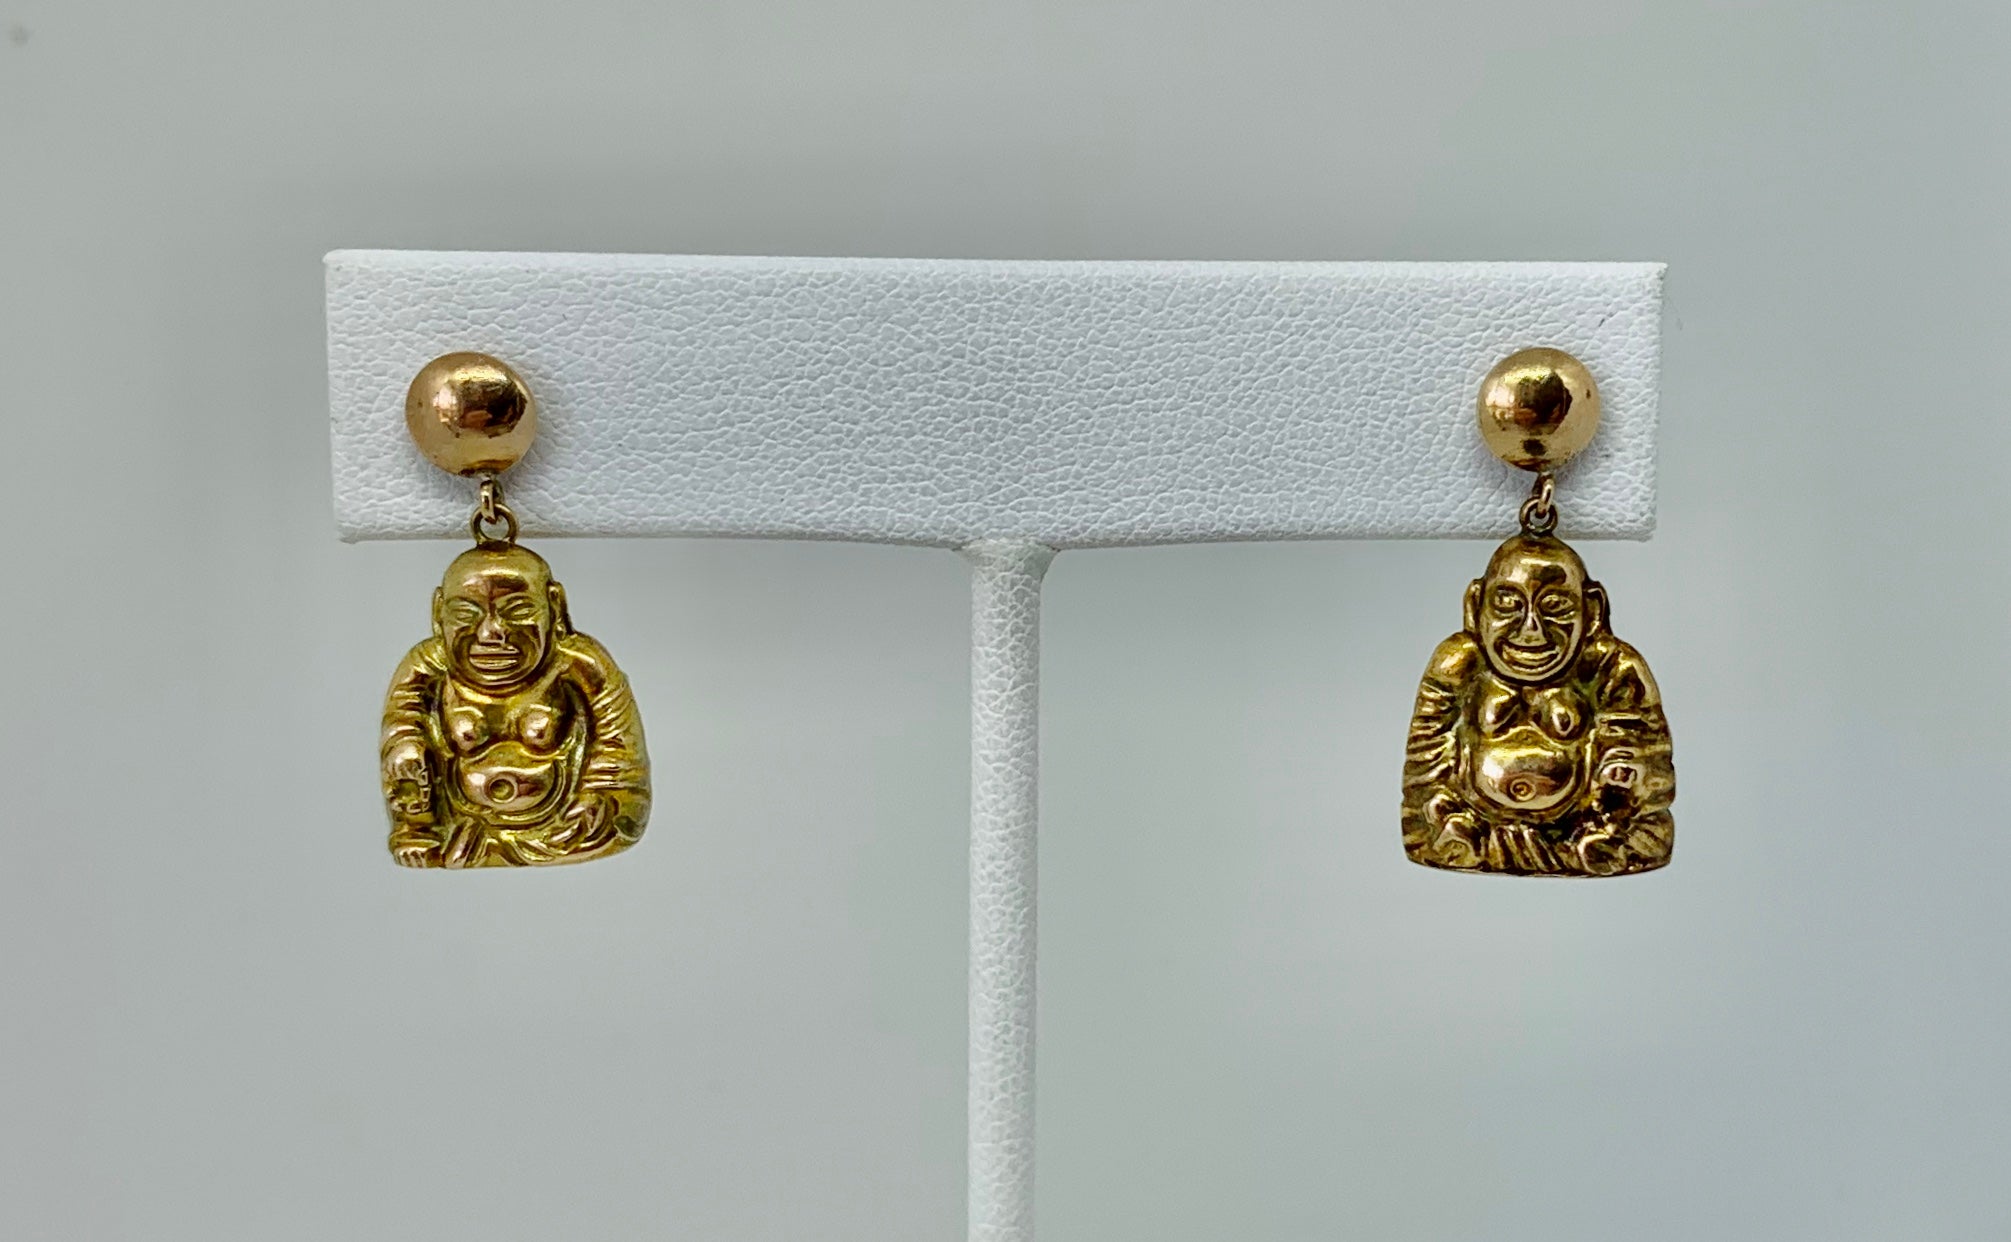 This is a wonderful pair of antique Smiling Happy Buddha Dangle Drop Earrings in 14 Karat Gold.  The wonderful earrings have two wonderful gold Buddhas.  The Buddhas are fully three dimensional.  The Buddhas have beautiful smiling faces and round